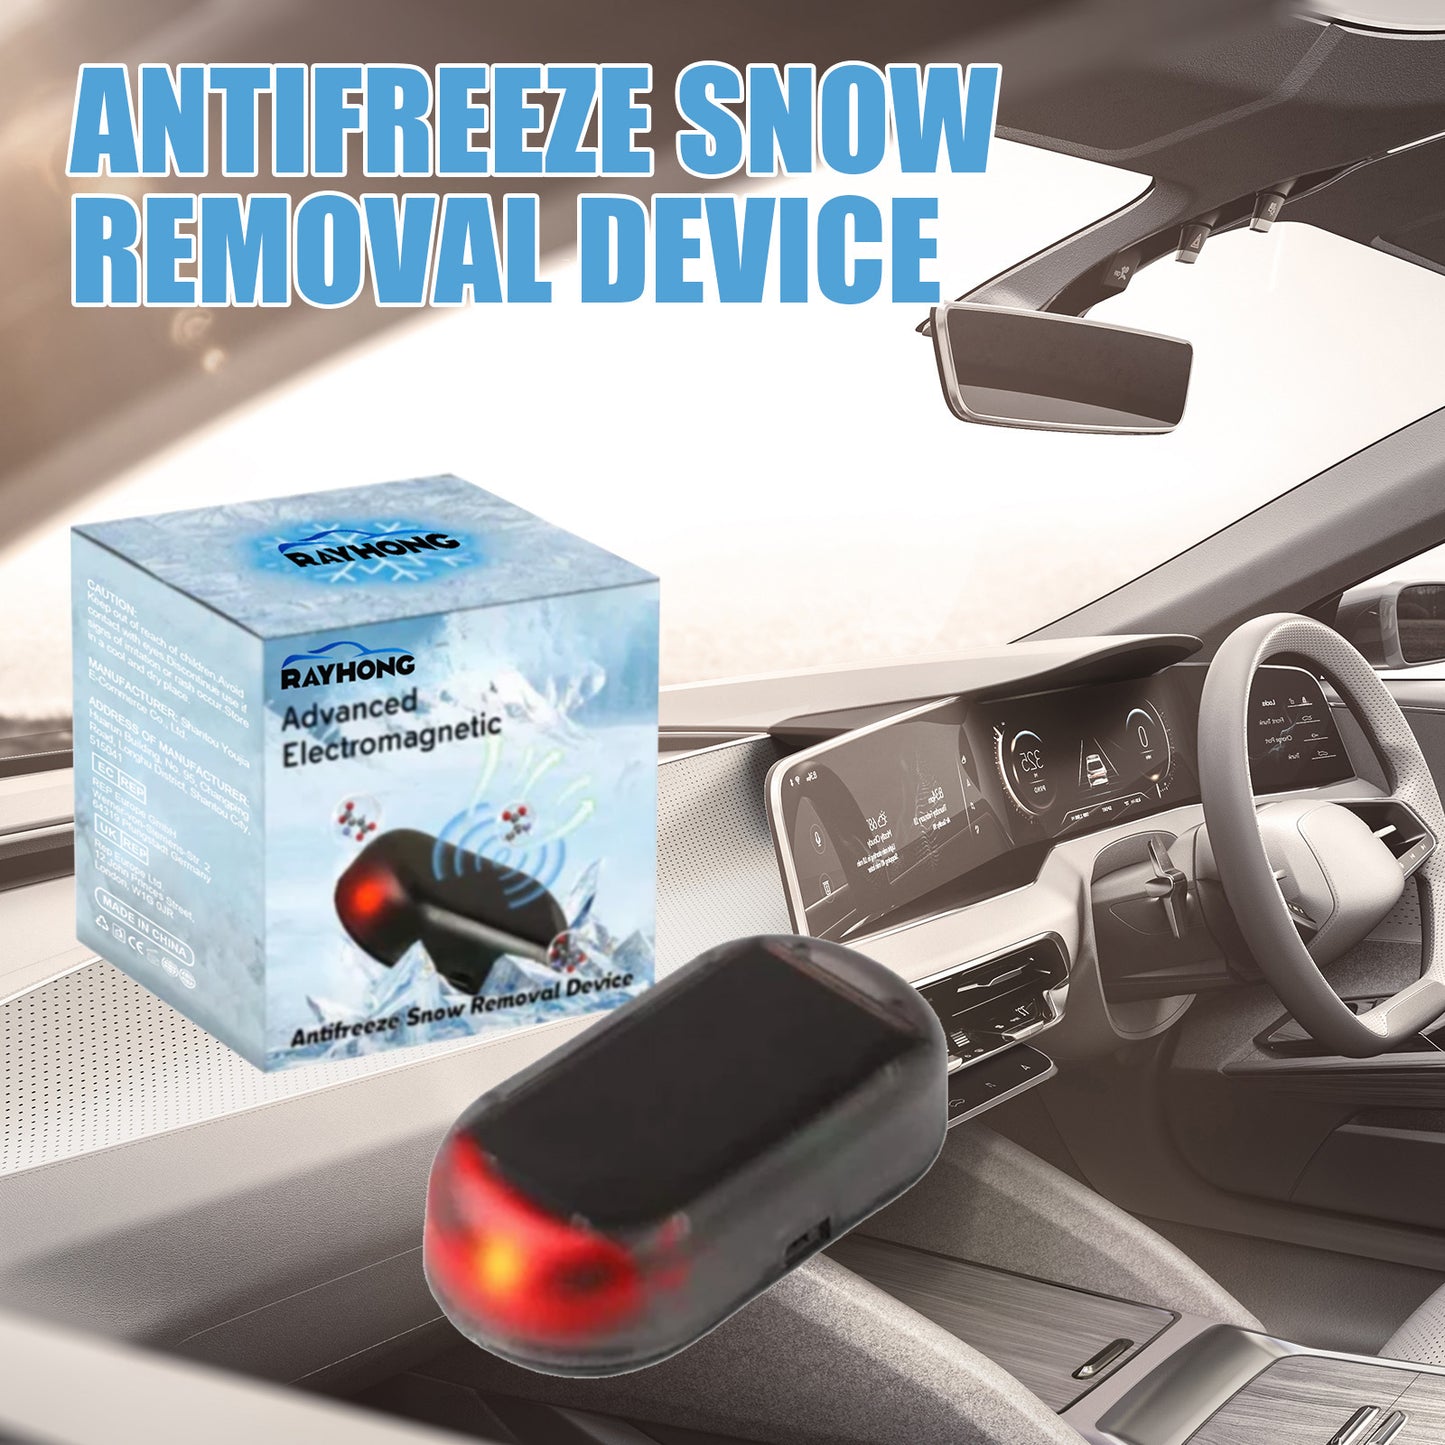 Advanced Electromagnetic Snow Removal Device Comprehensively